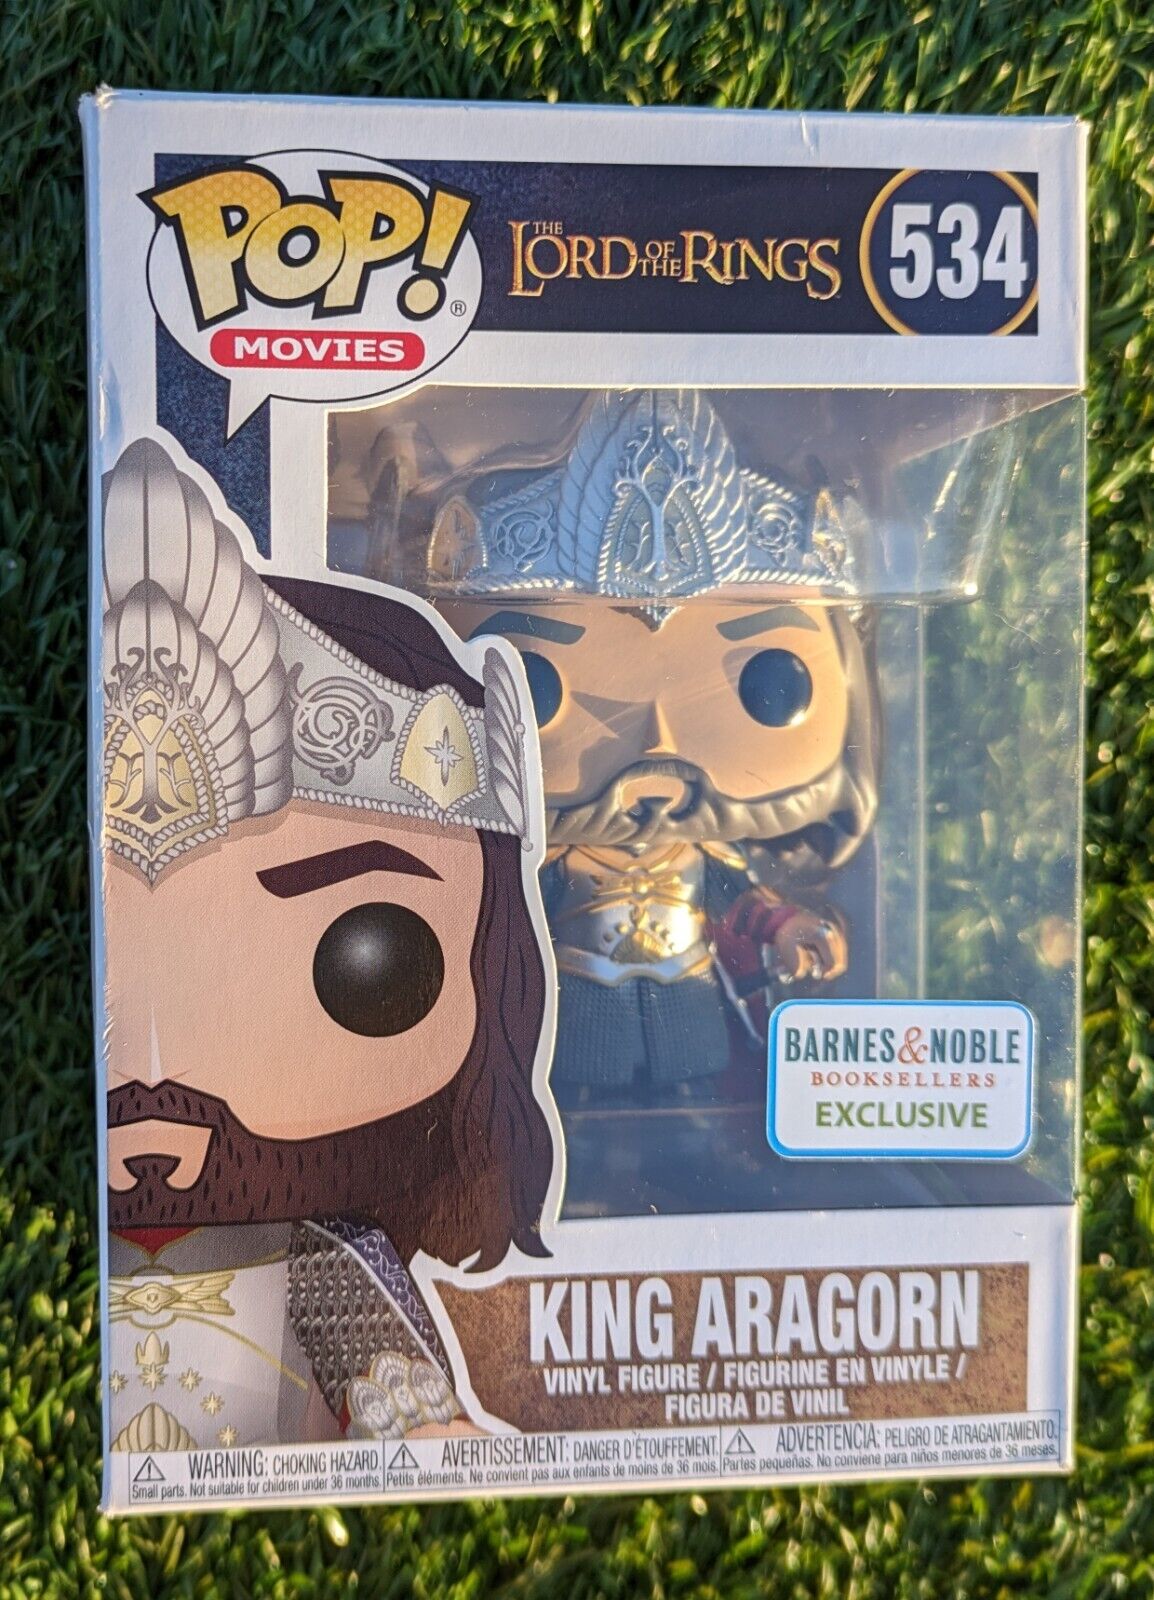 Funko Pop Vinyl: The Lord of the Rings - King Aragorn (Barnes and Noble, NEW)